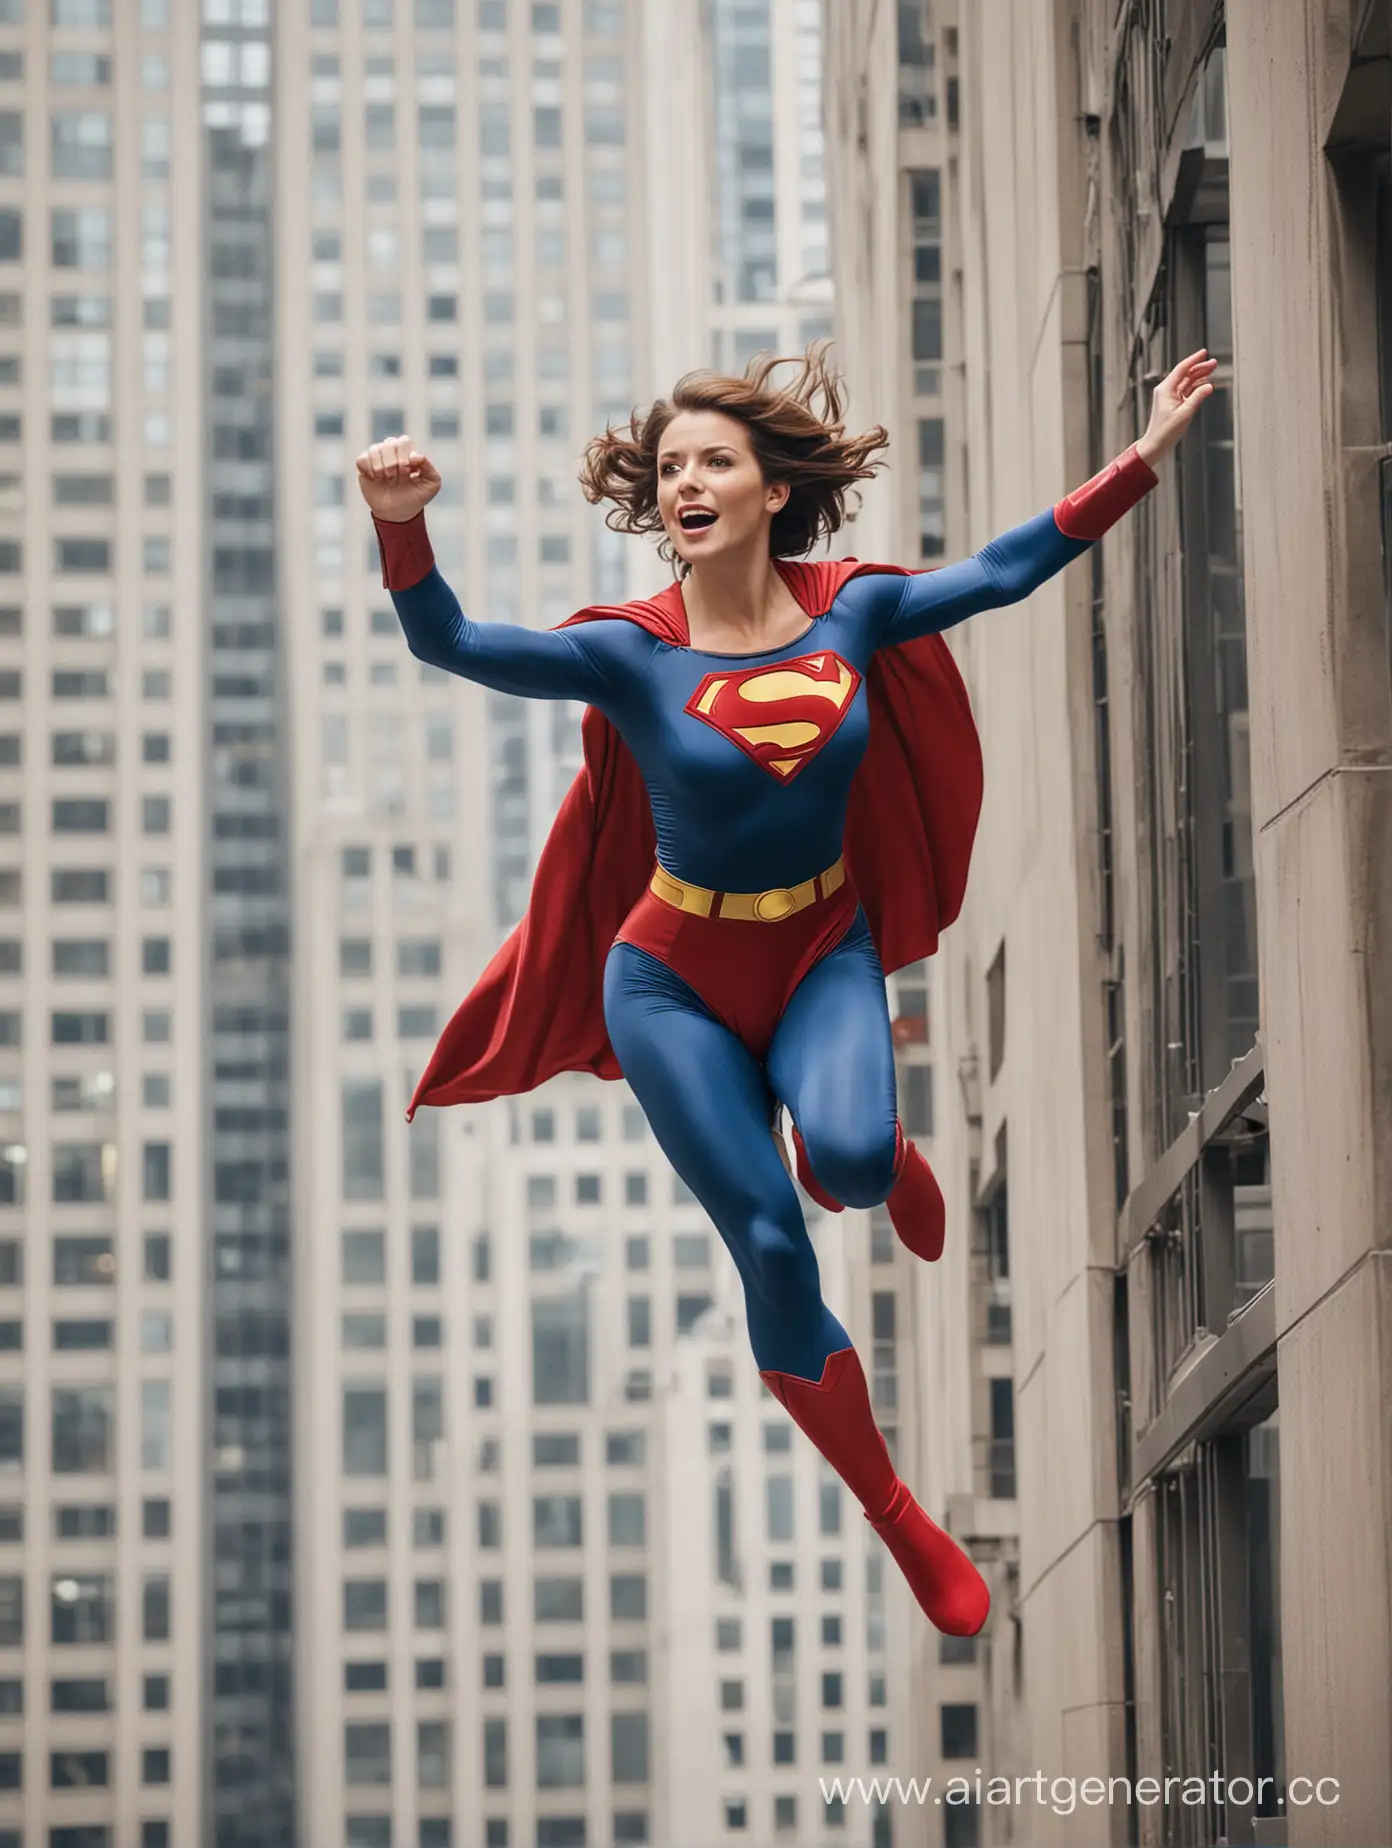 A beautiful woman with brown hair, age 40, She is leaping out of a skyscraper window like Superman, she is wearing the classic Superman costume